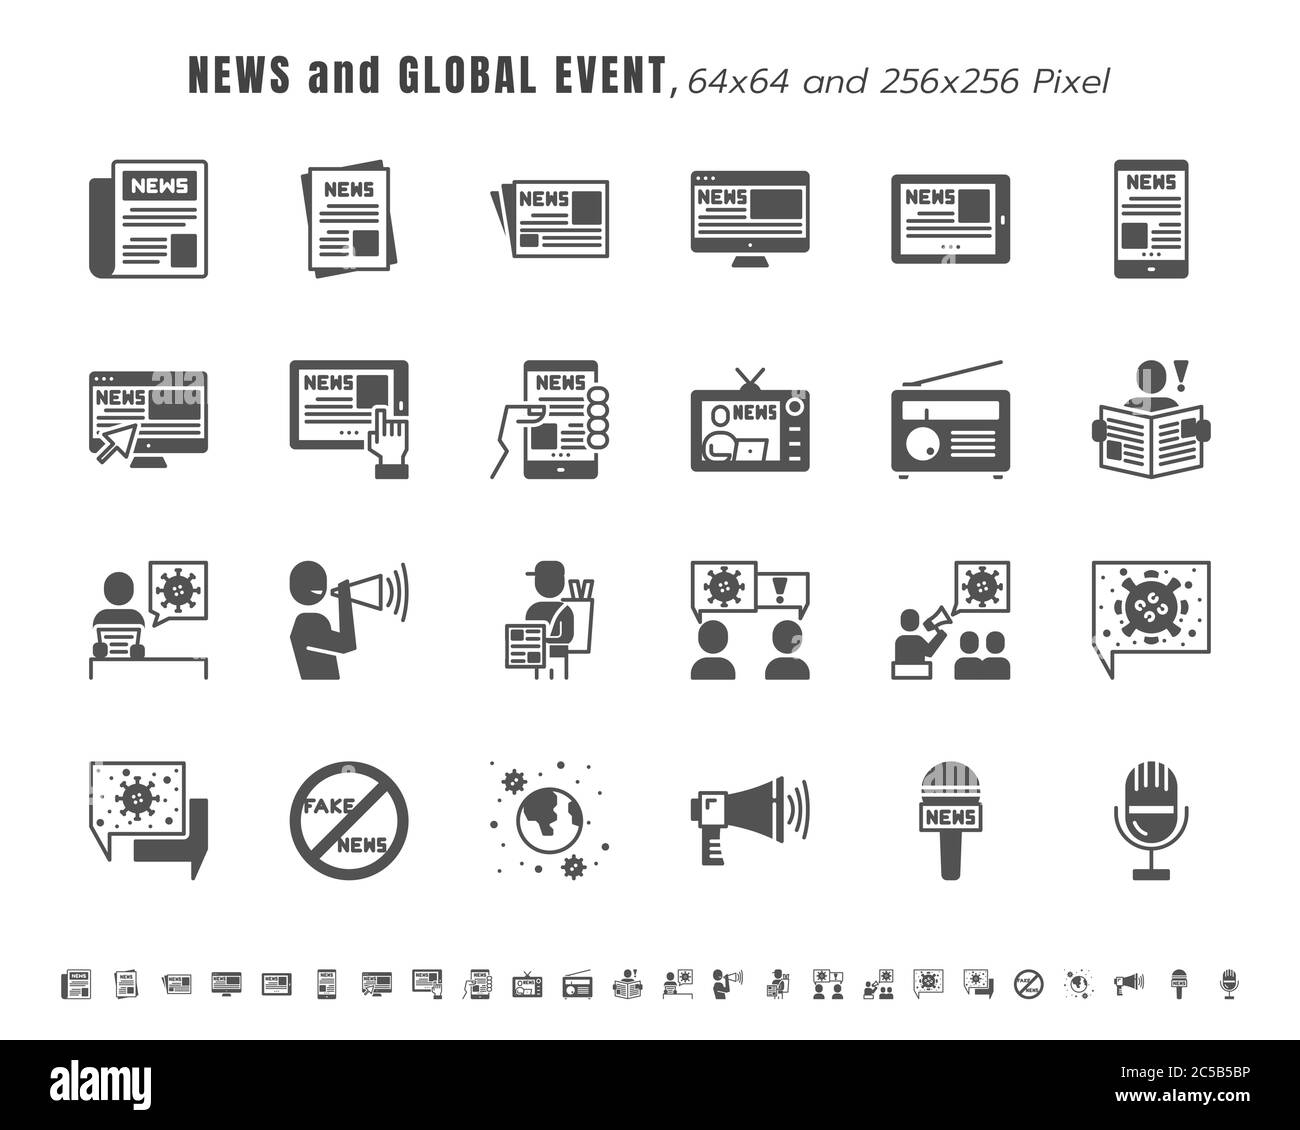 Simple Set of News and Global Event of Coronavirus, Covid-19 Related in Different Platform. Such as Tablet, Phone, Speech Bubble. Solid Glyph Icons Ve Stock Vector